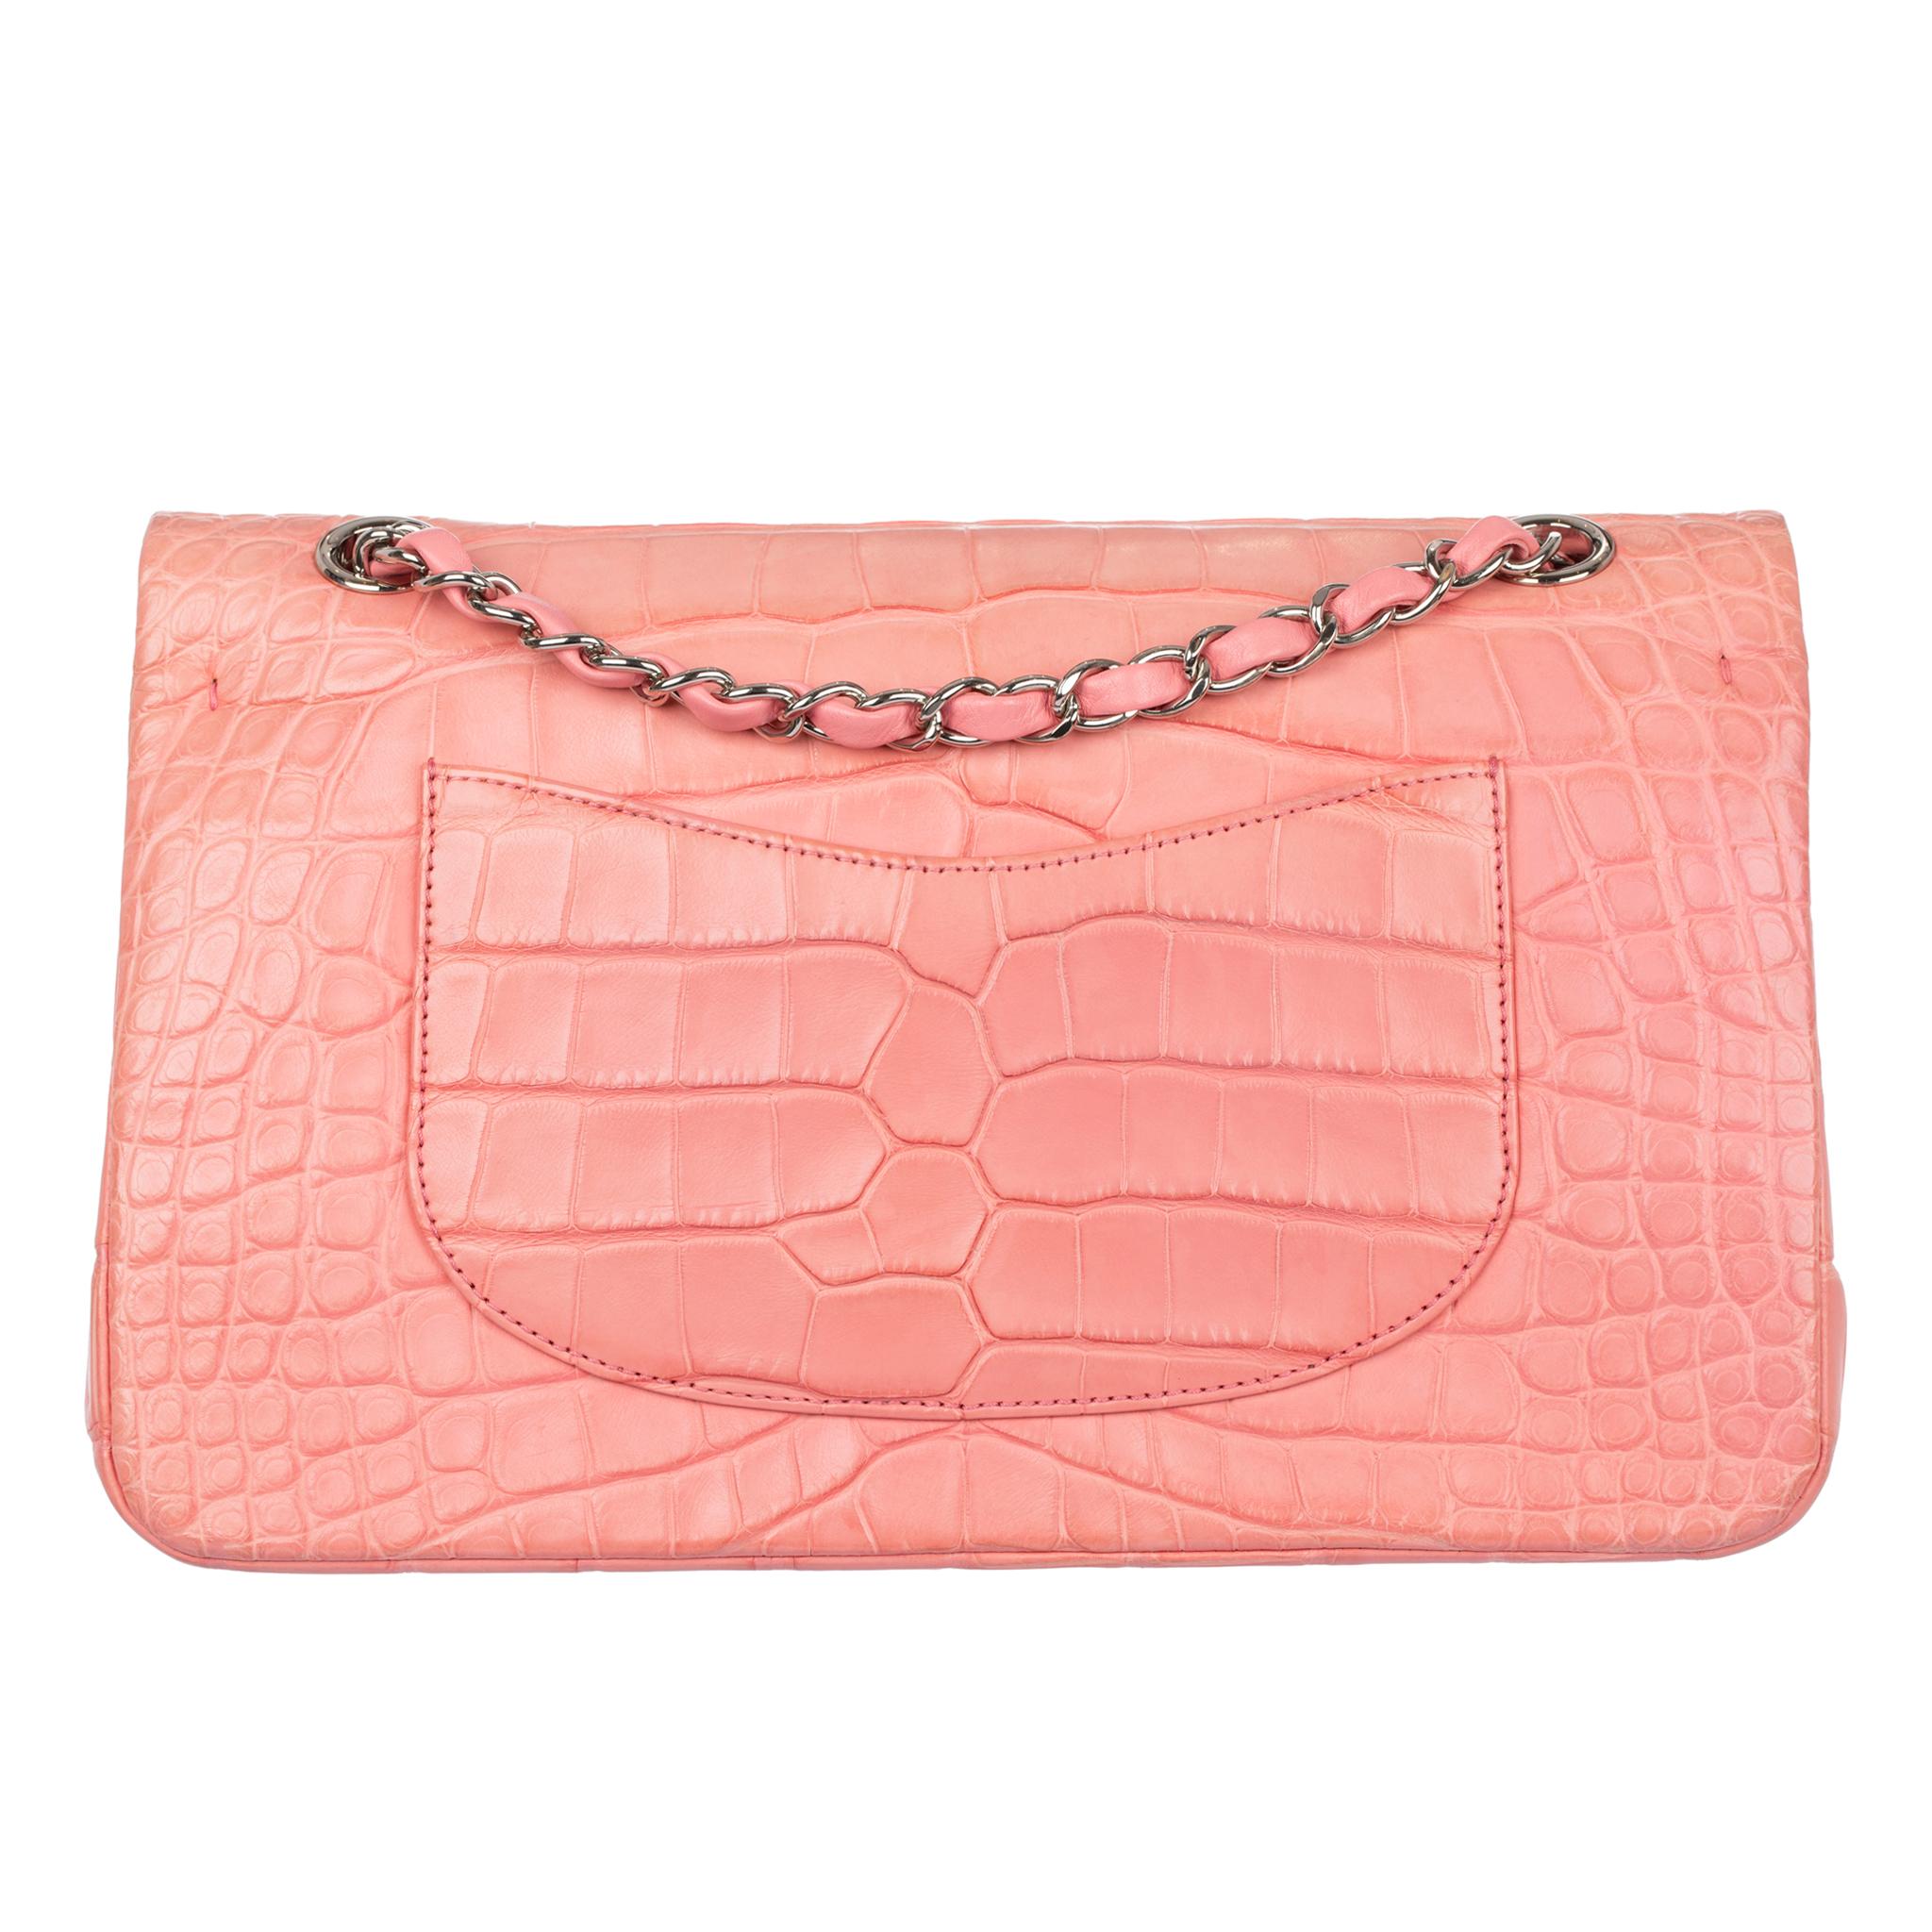 Chanel Medium Double Classic Flap Bag Coral Pink Matte Crocodile Leather Silver  In Excellent Condition For Sale In Sydney, New South Wales